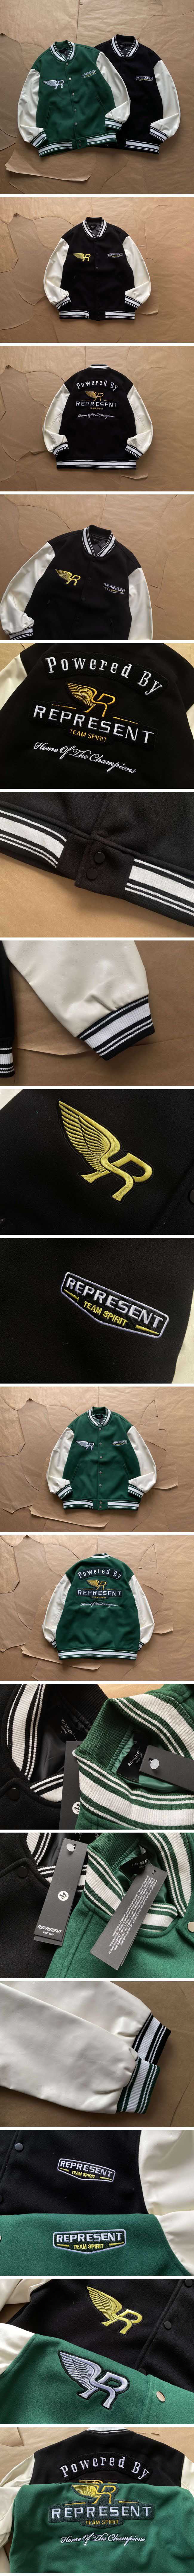 Represent Powered By Represento Jacket リプレゼント パワード バイ リプレゼント ジャケット